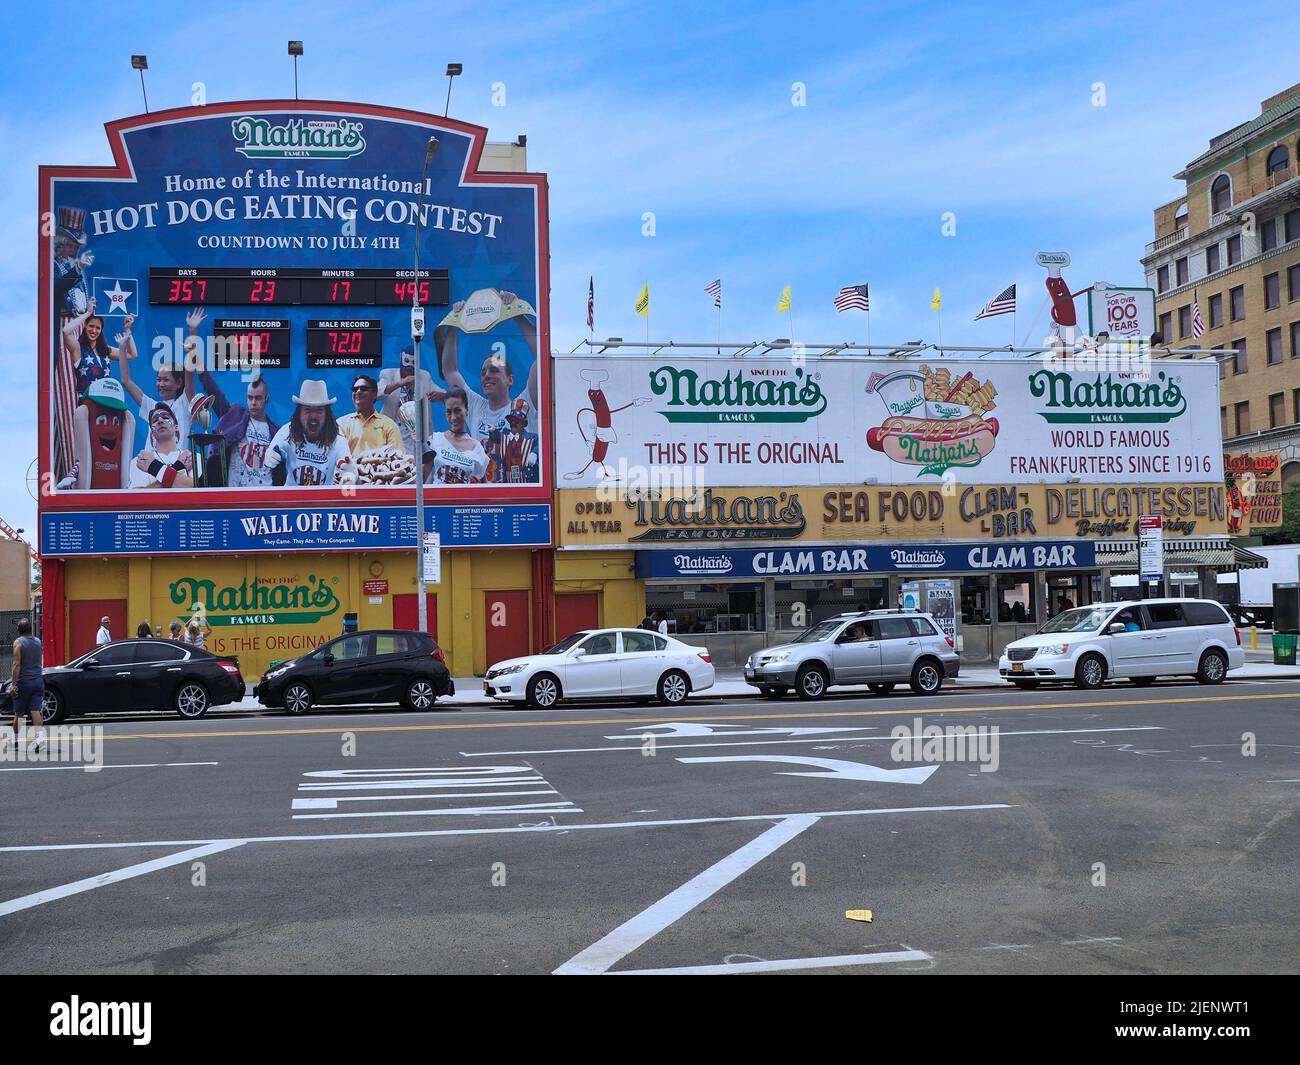 Coney Island amusement area in New York with Nathan's Famous hot dog stand Stock Photo